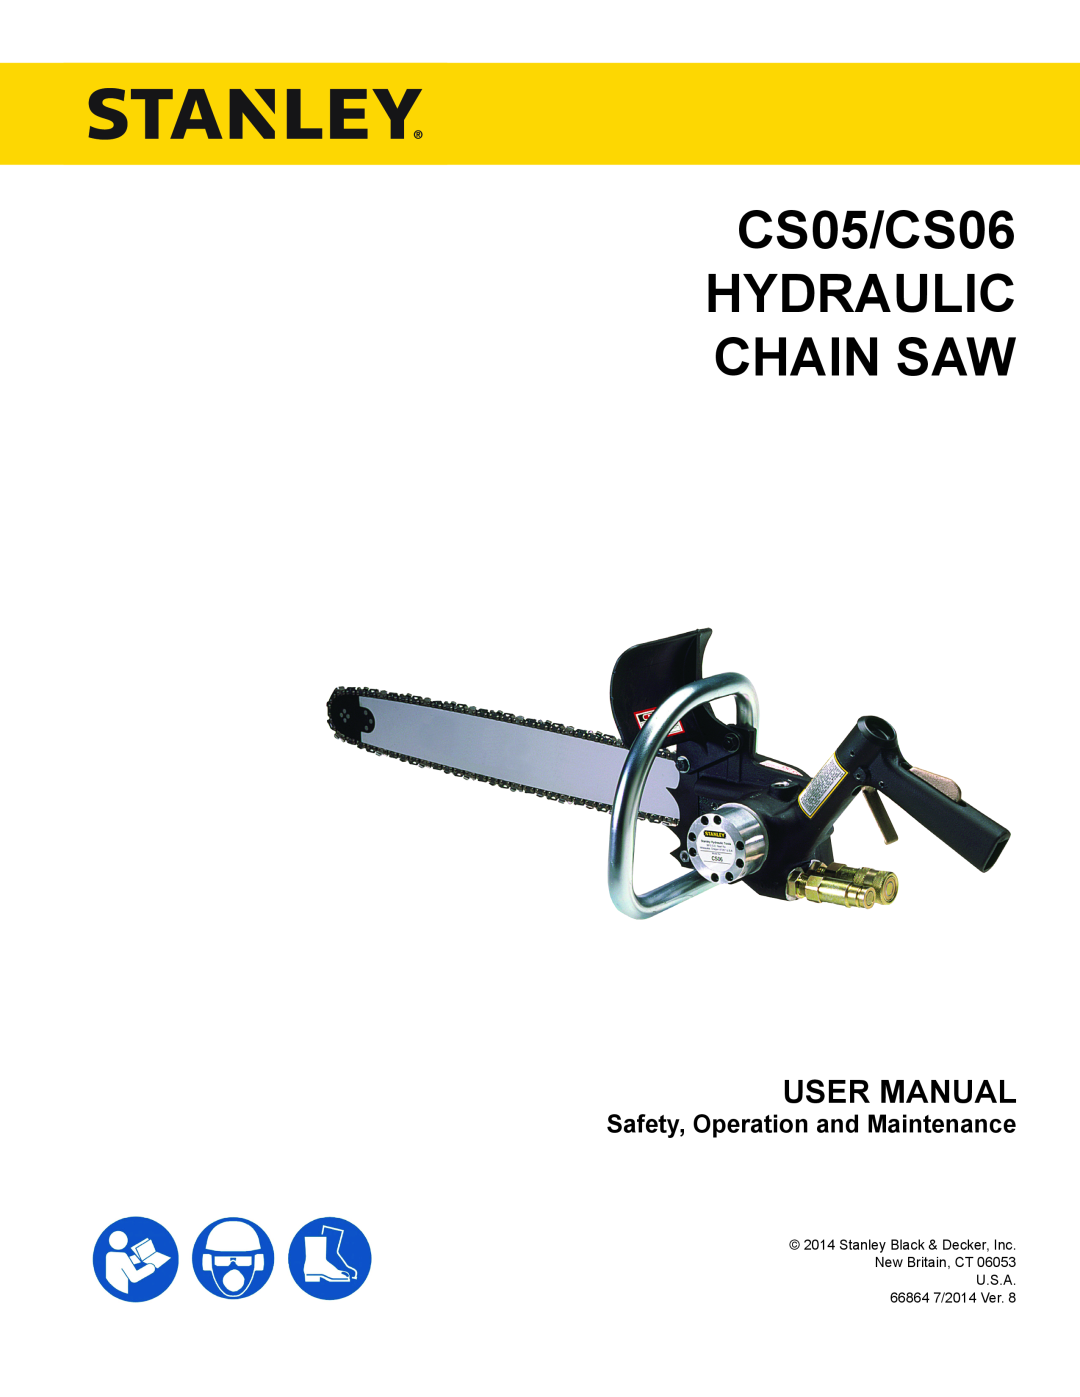 Stanley Black & Decker manual User Manual, Safety, Operation and Maintenance, CS05/CS06 HYDRAULIC CHAIN SAW 